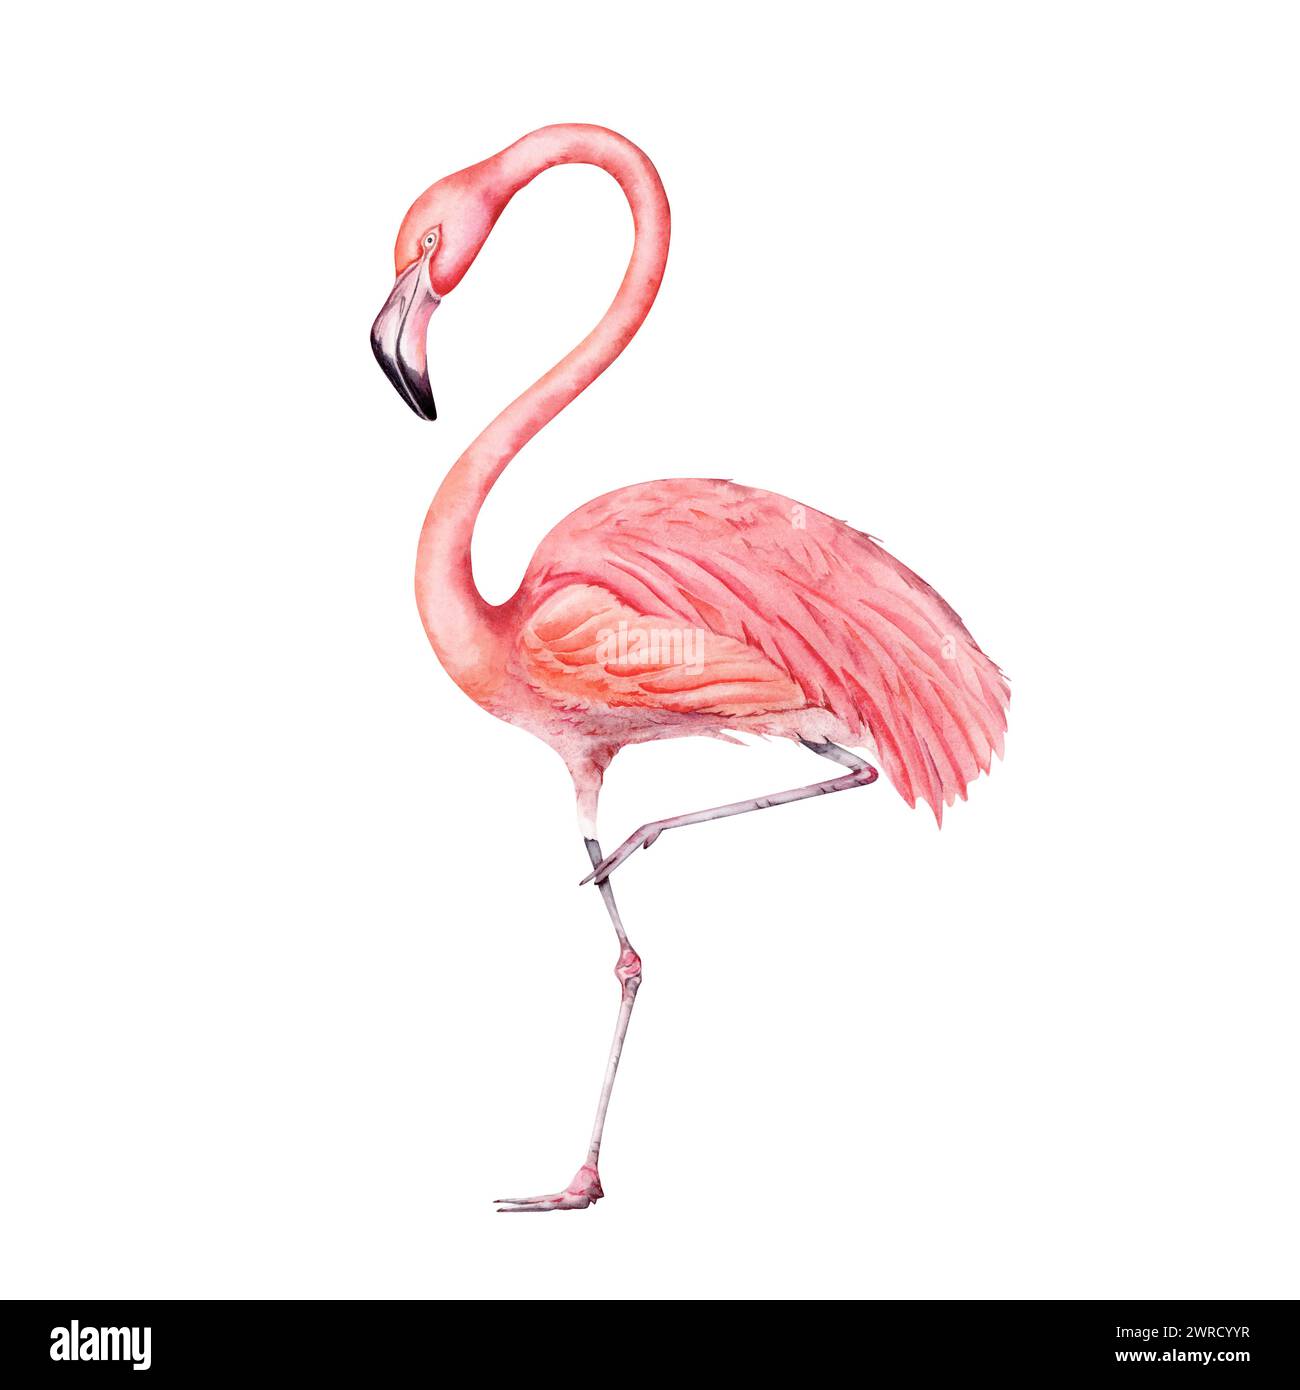 Pink flamingo bird painting. Isolated on white background. Hand drawn illustration element. For exotic tropical designs, cards, prints, invitations. H Stock Photo